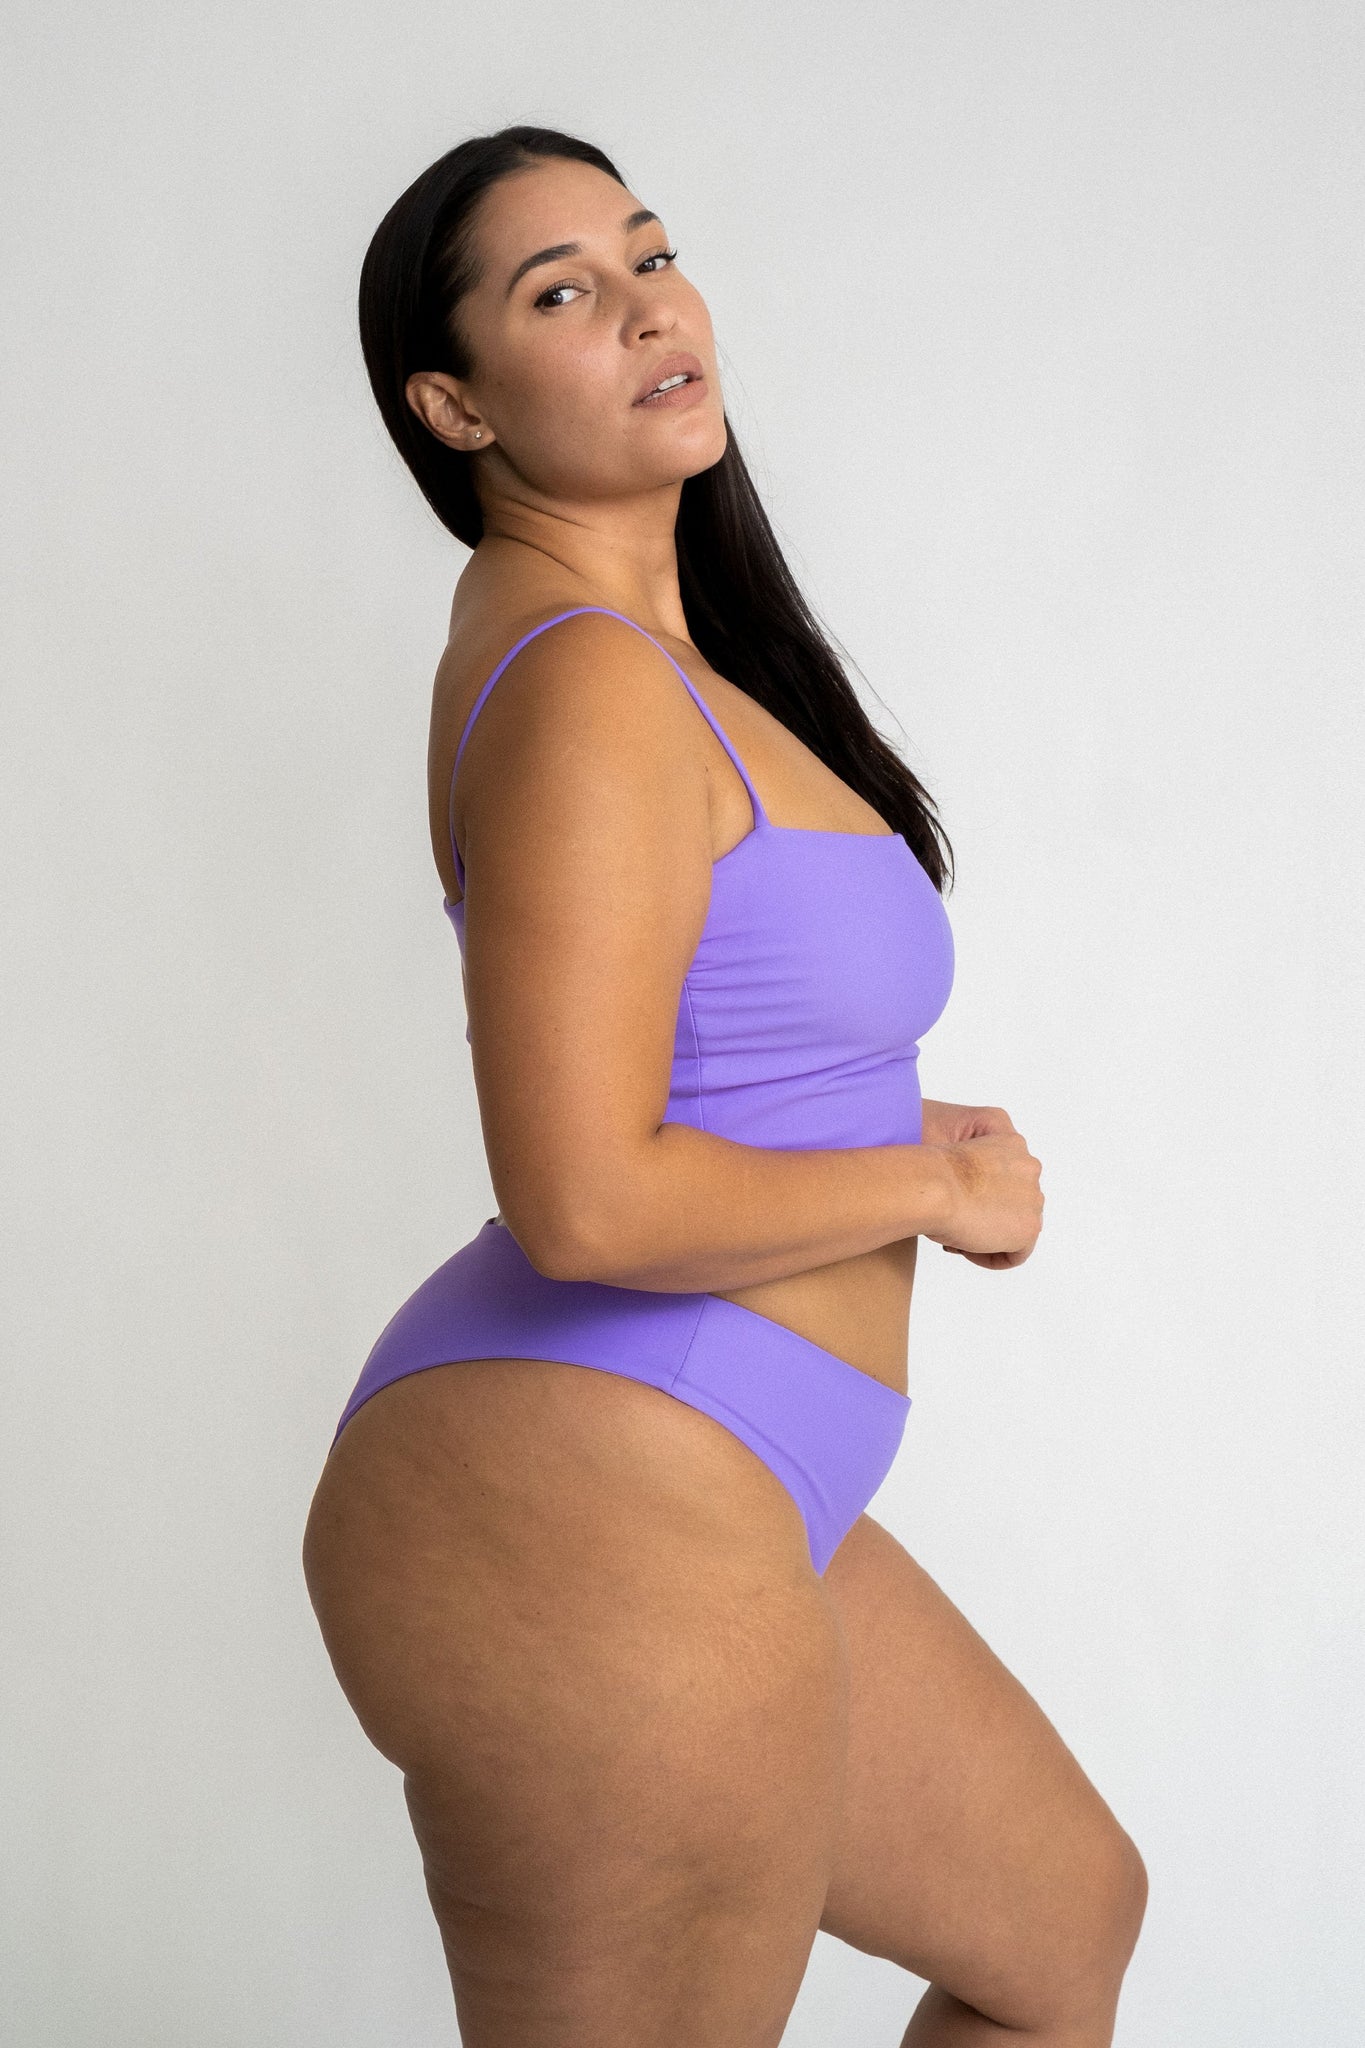 The side profile of a woman wearing bright lavender high cut bikini bottoms and a matching bright lavender tankini top.